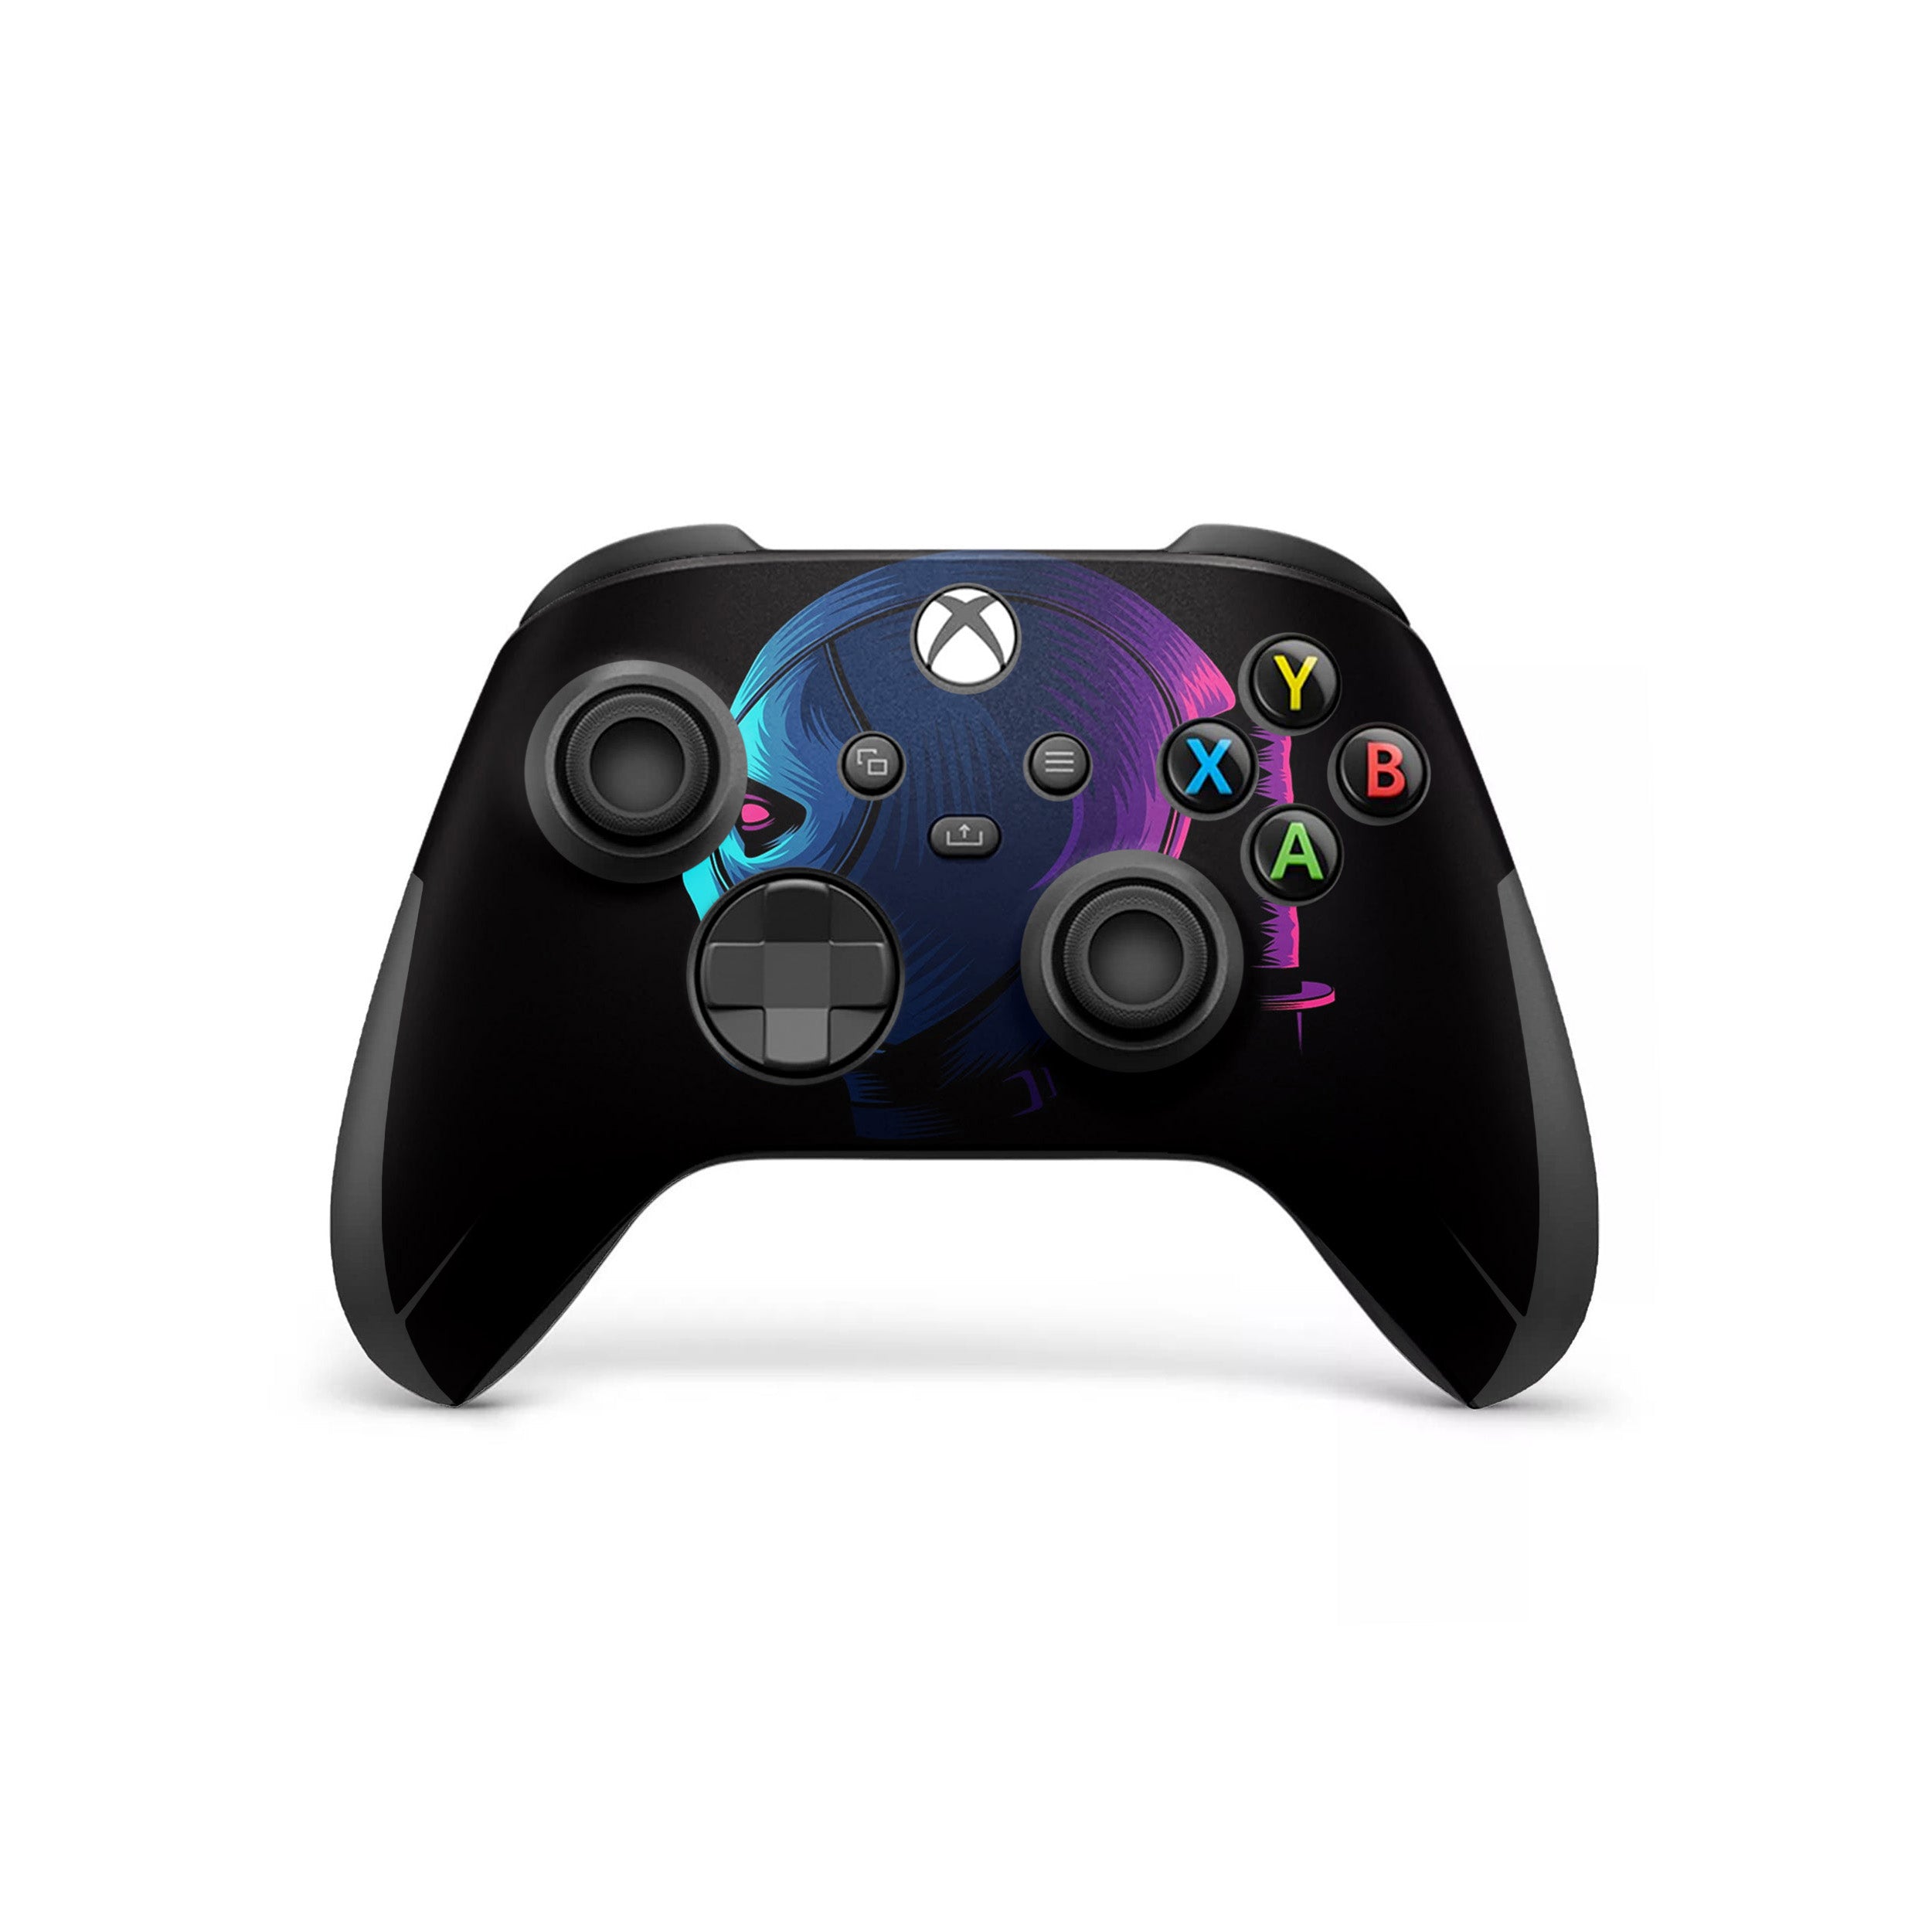 A video game skin featuring a Marvel Comics Deadpool design for the Xbox Wireless Controller.